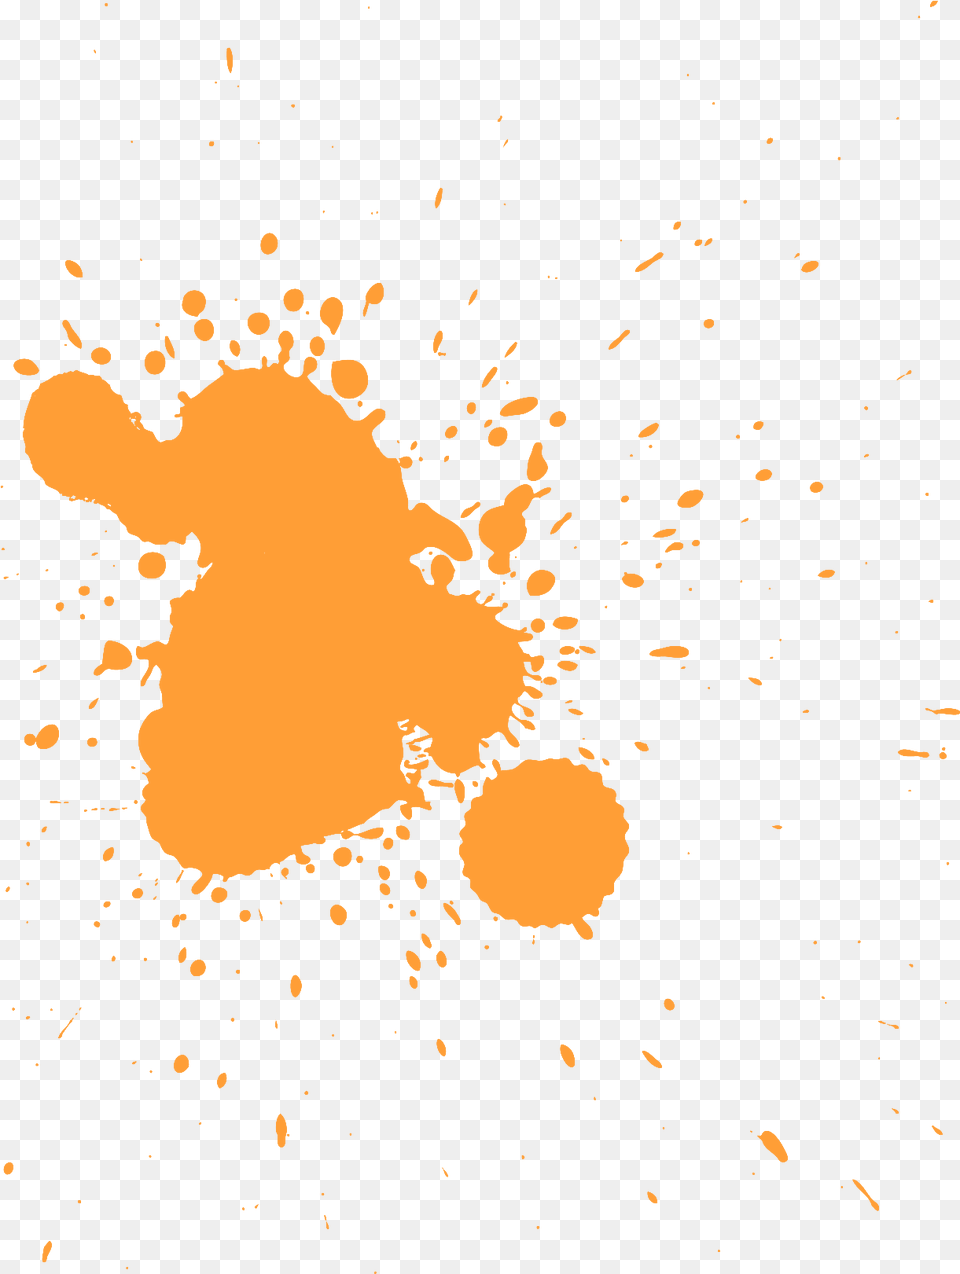 Orange Splat Image Icons And Backgrounds Transparent Paint Splatter, Stain, Person, Face, Head Free Png